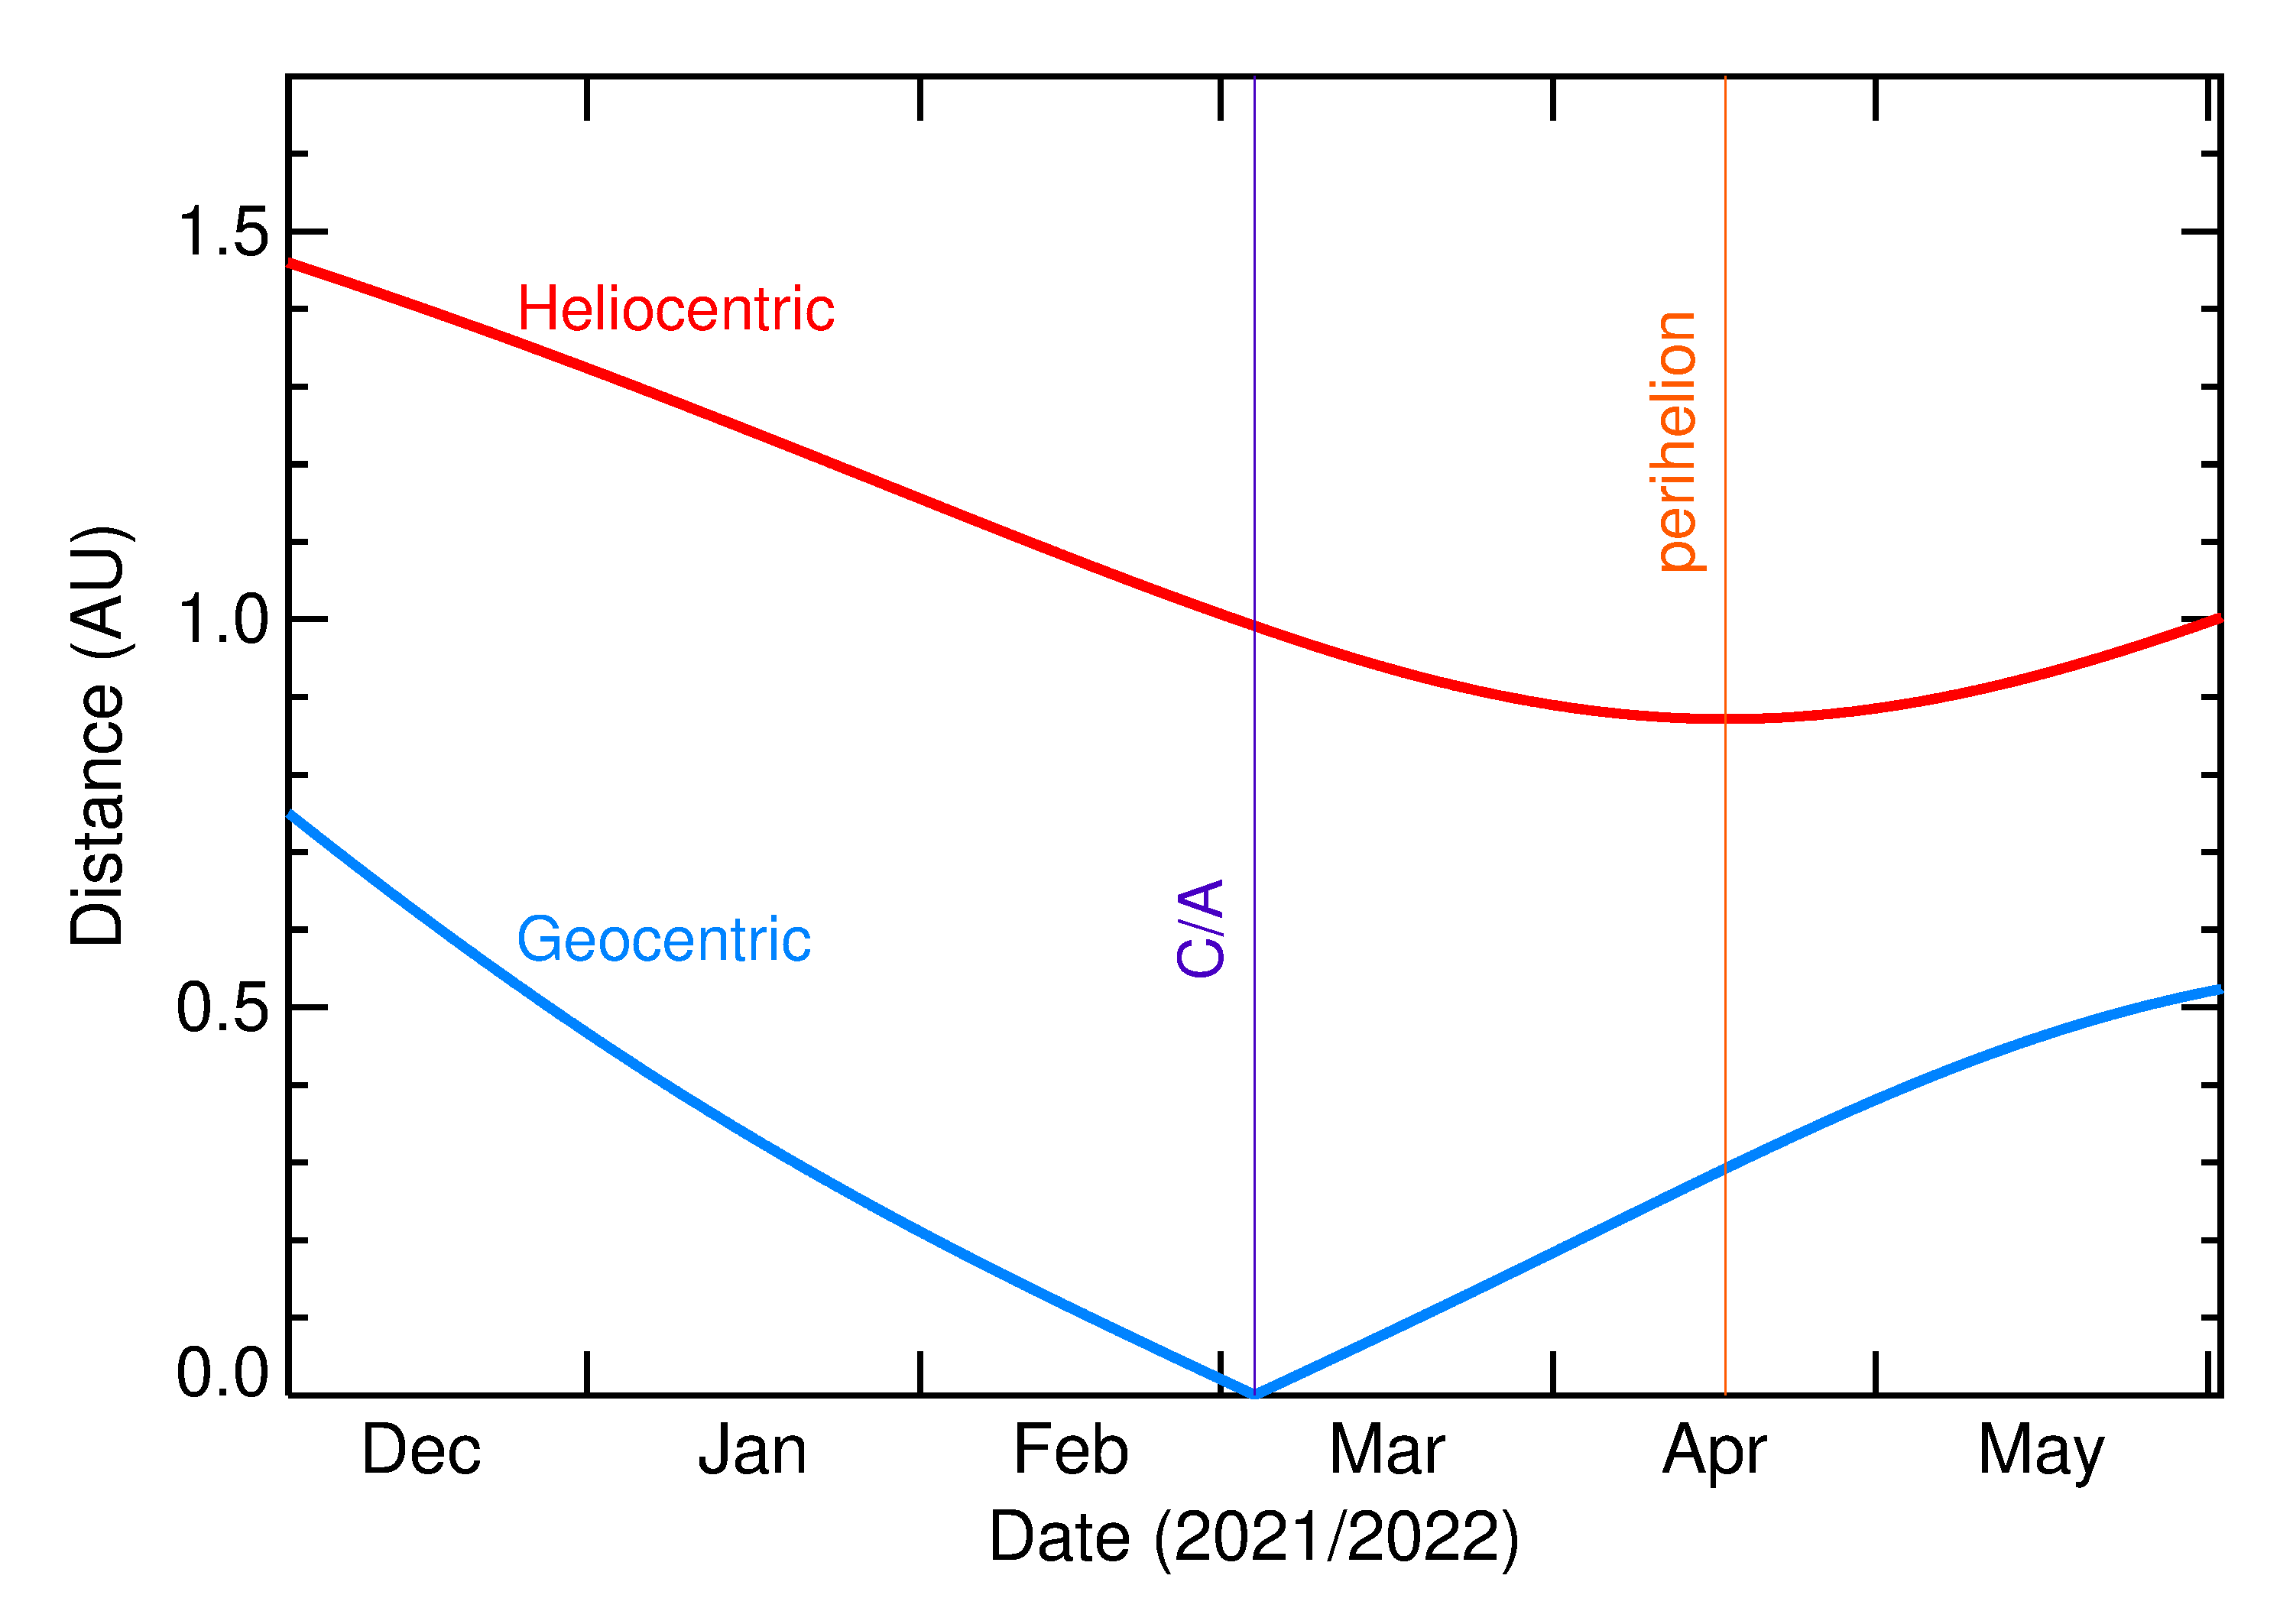 Heliocentric and Geocentric Distances of 2022 EQ in the months around closest approach